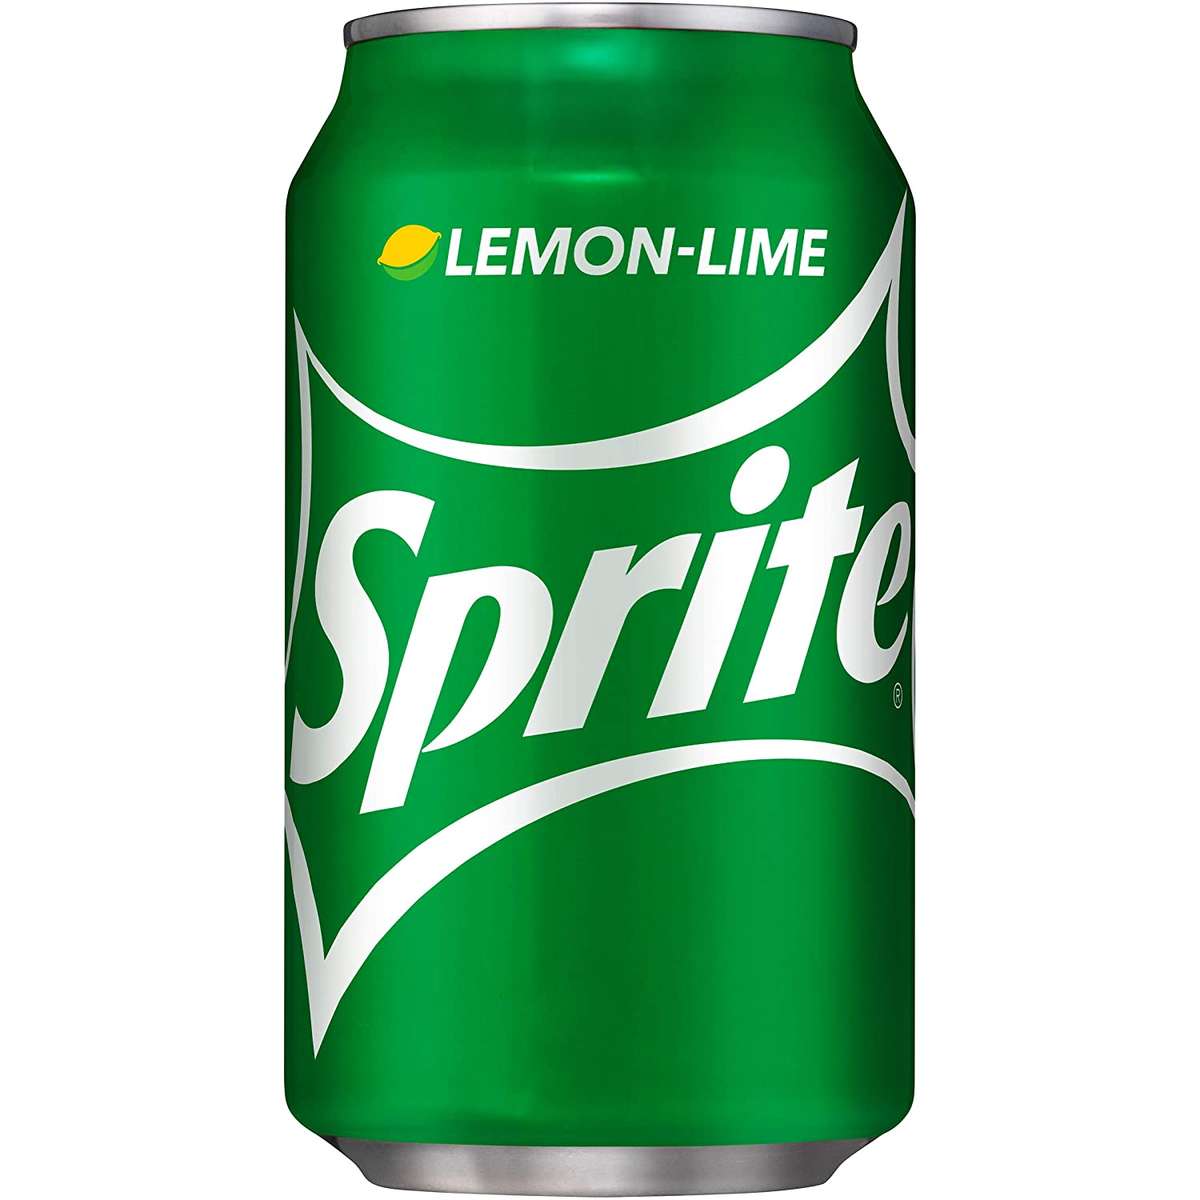 Soda: Sprite (Can) - Menu - The Ultimate Self-Pour Beer Experience.  Explore, Pour, Indulge!